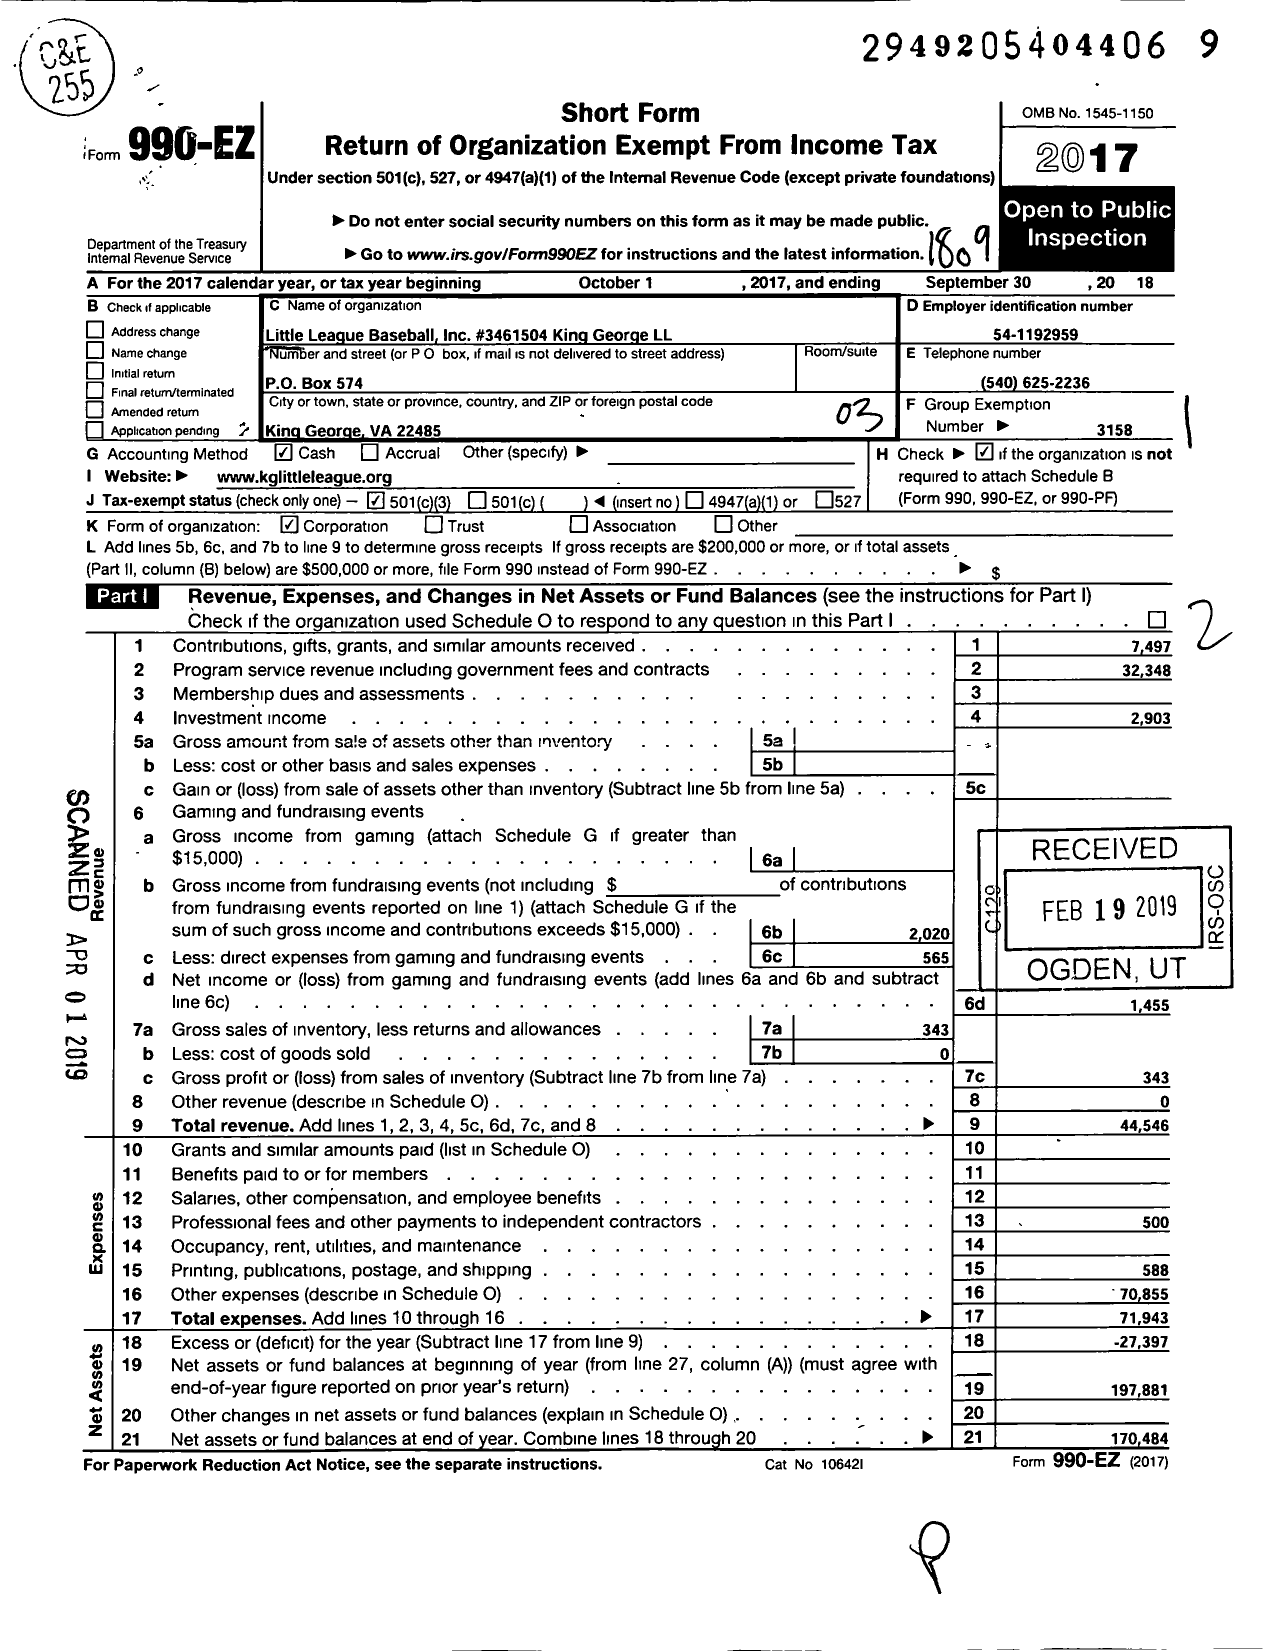 Image of first page of 2017 Form 990EZ for LITTLE LEAGUE BASEBALL - 3461504 King George LITTLE LEAGUE